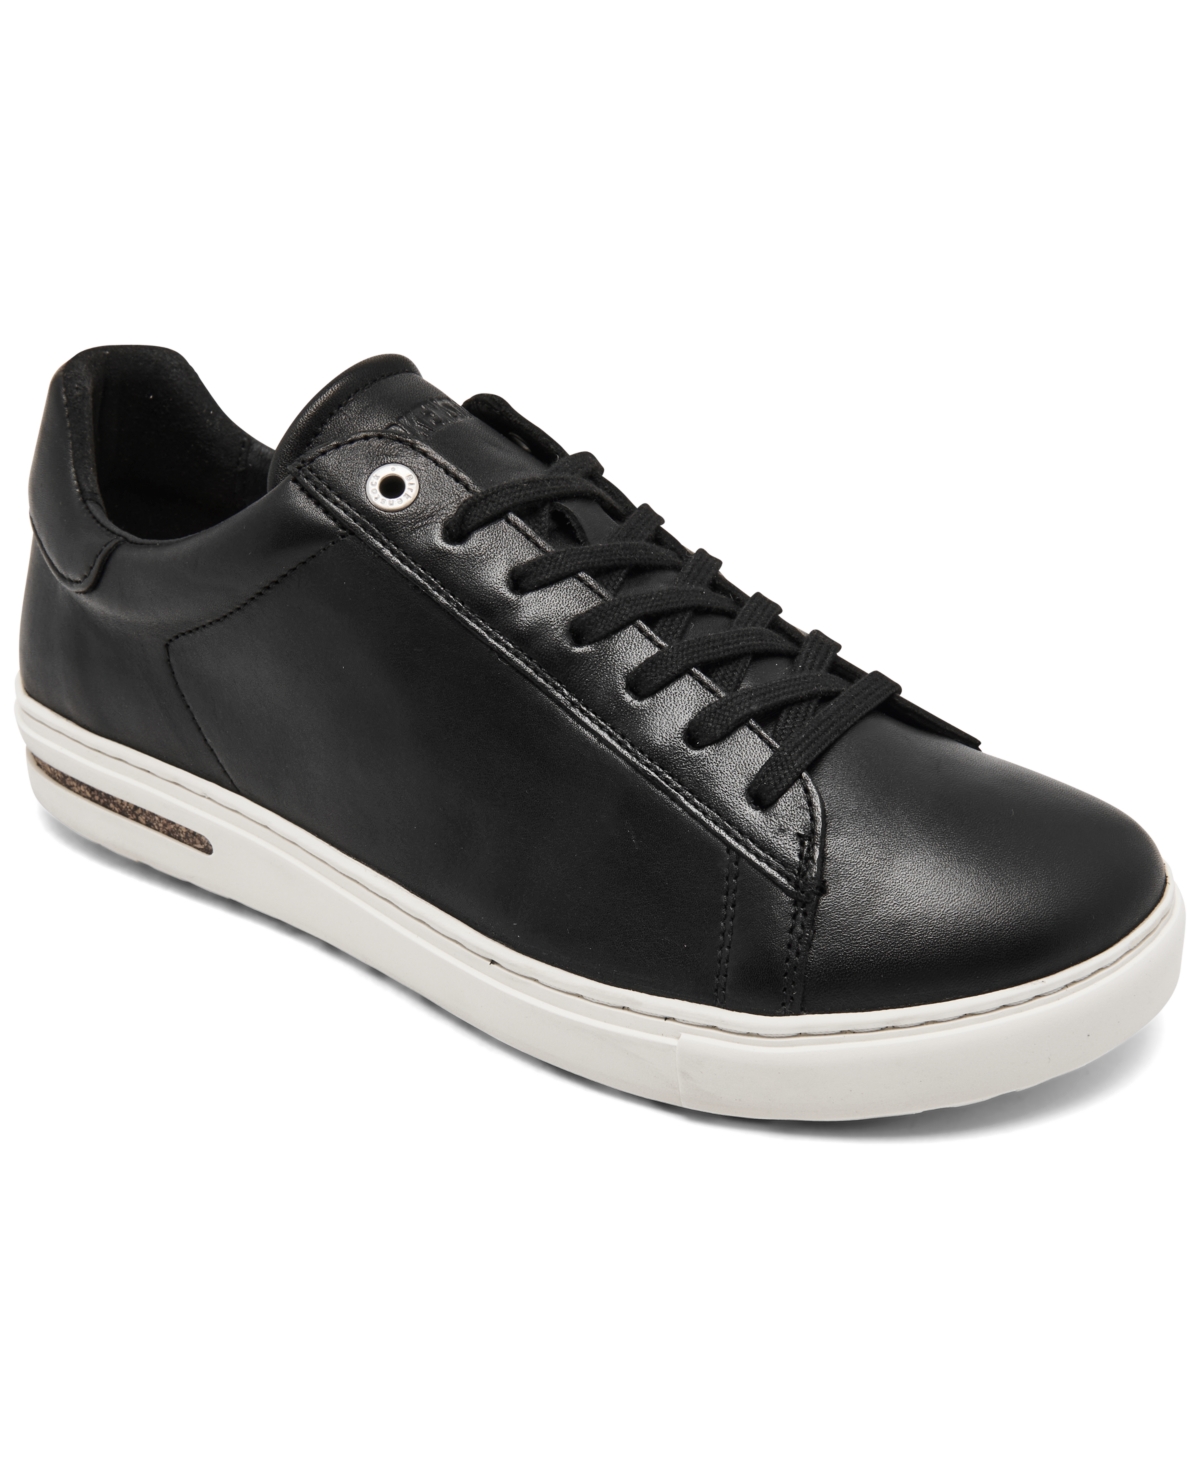 Men's Bend Low Leather Casual Sneakers from Finish Line - White